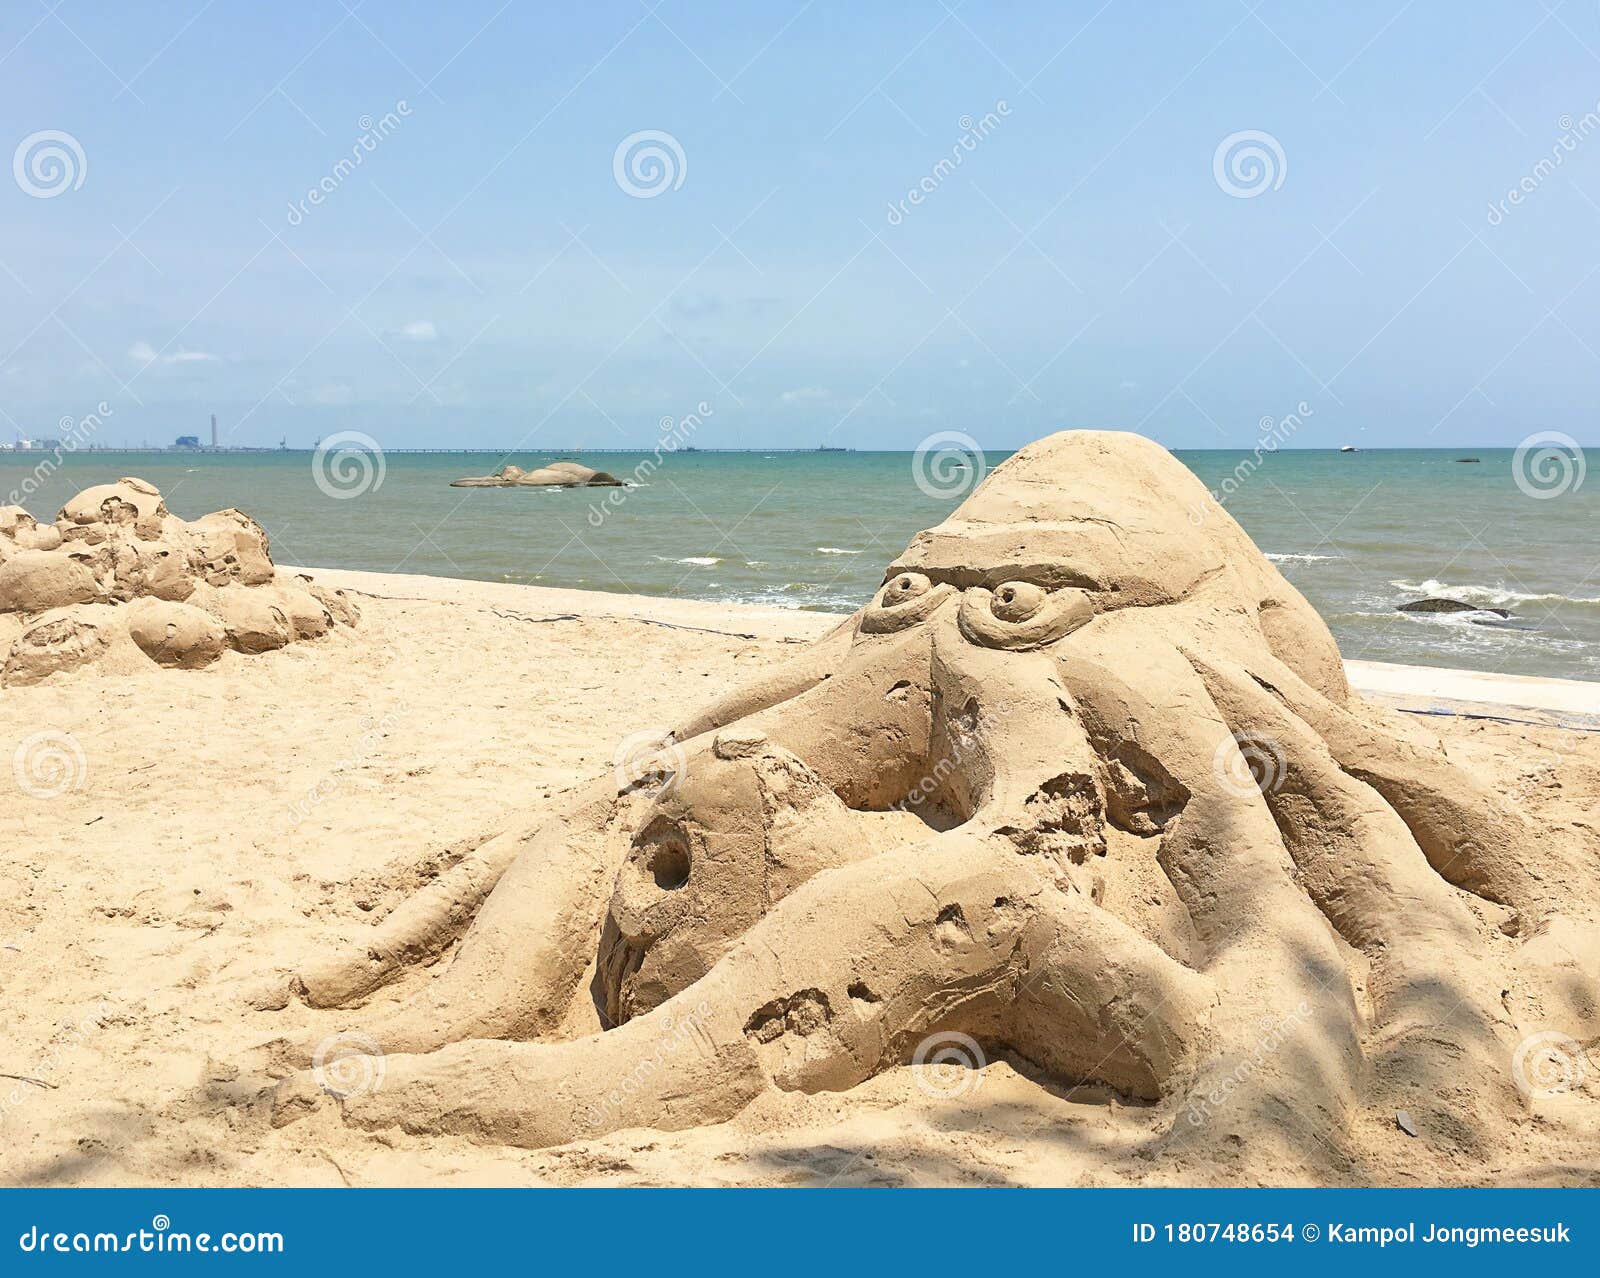 A Pile of Sand Sculptures of Animals Stock Photo - Image of pattern,  buddhism: 180748654